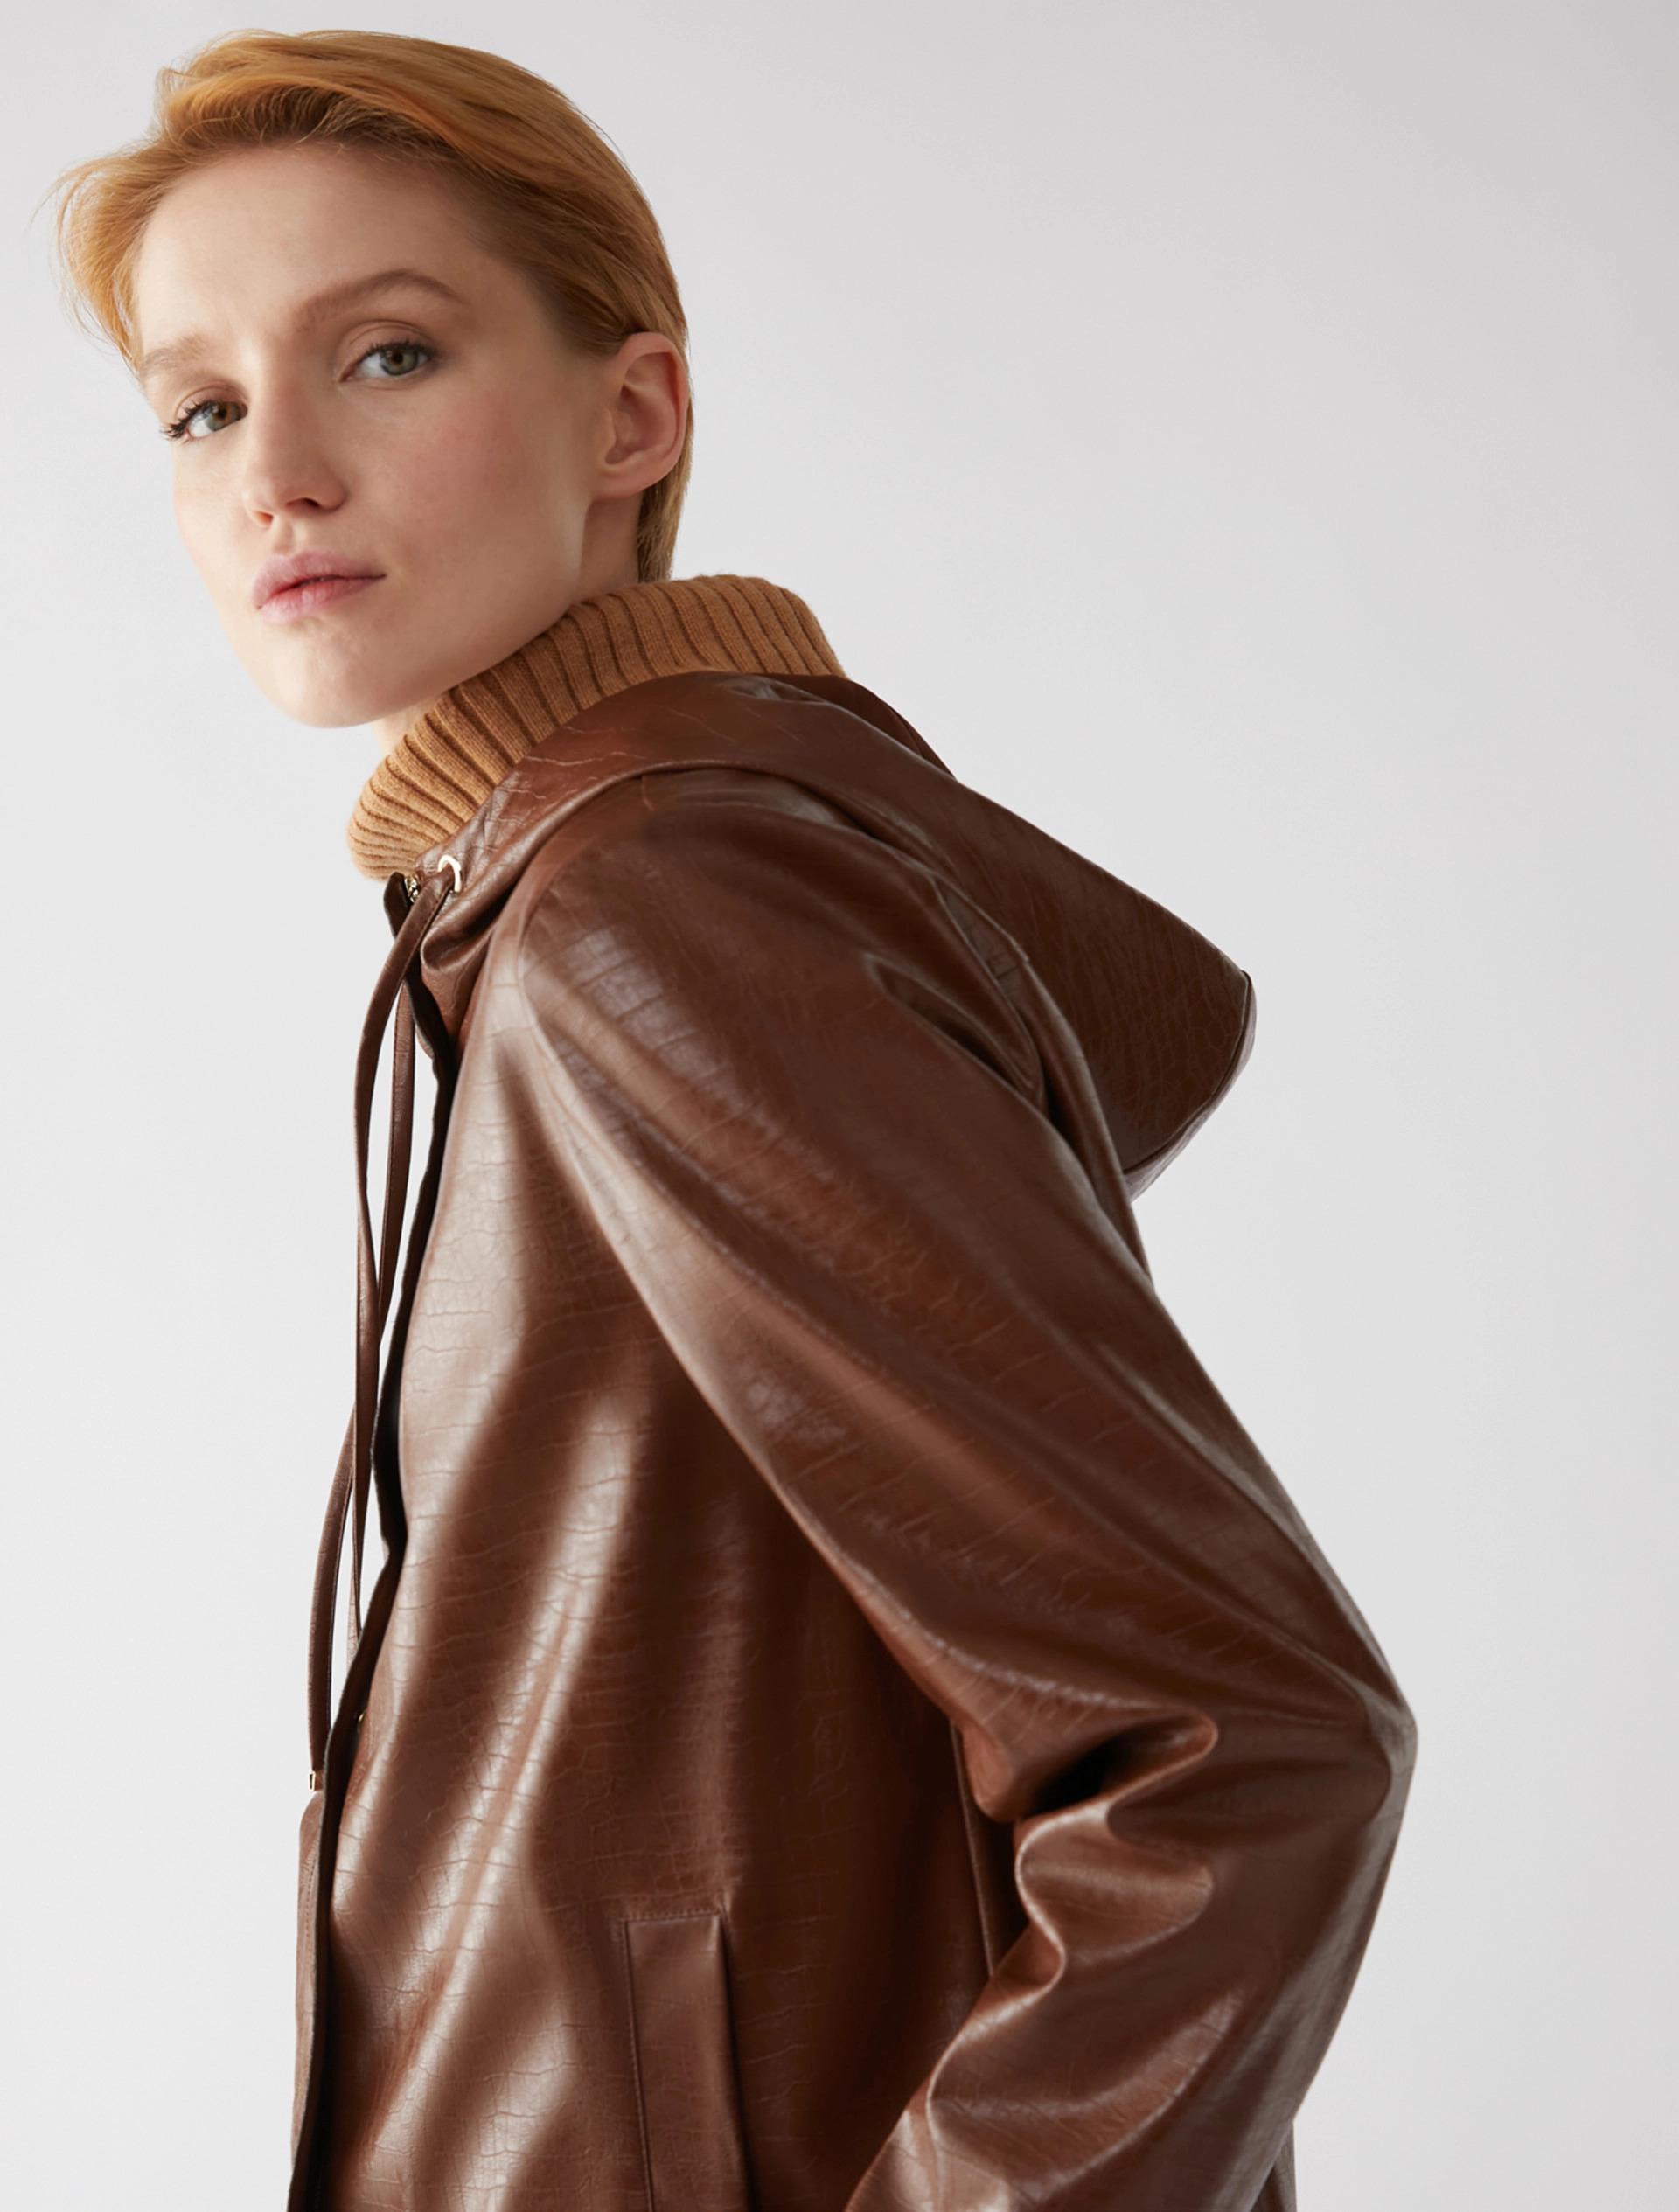 Wanda Boutique - Real leather jacket. Gold colored zip. Penny Black